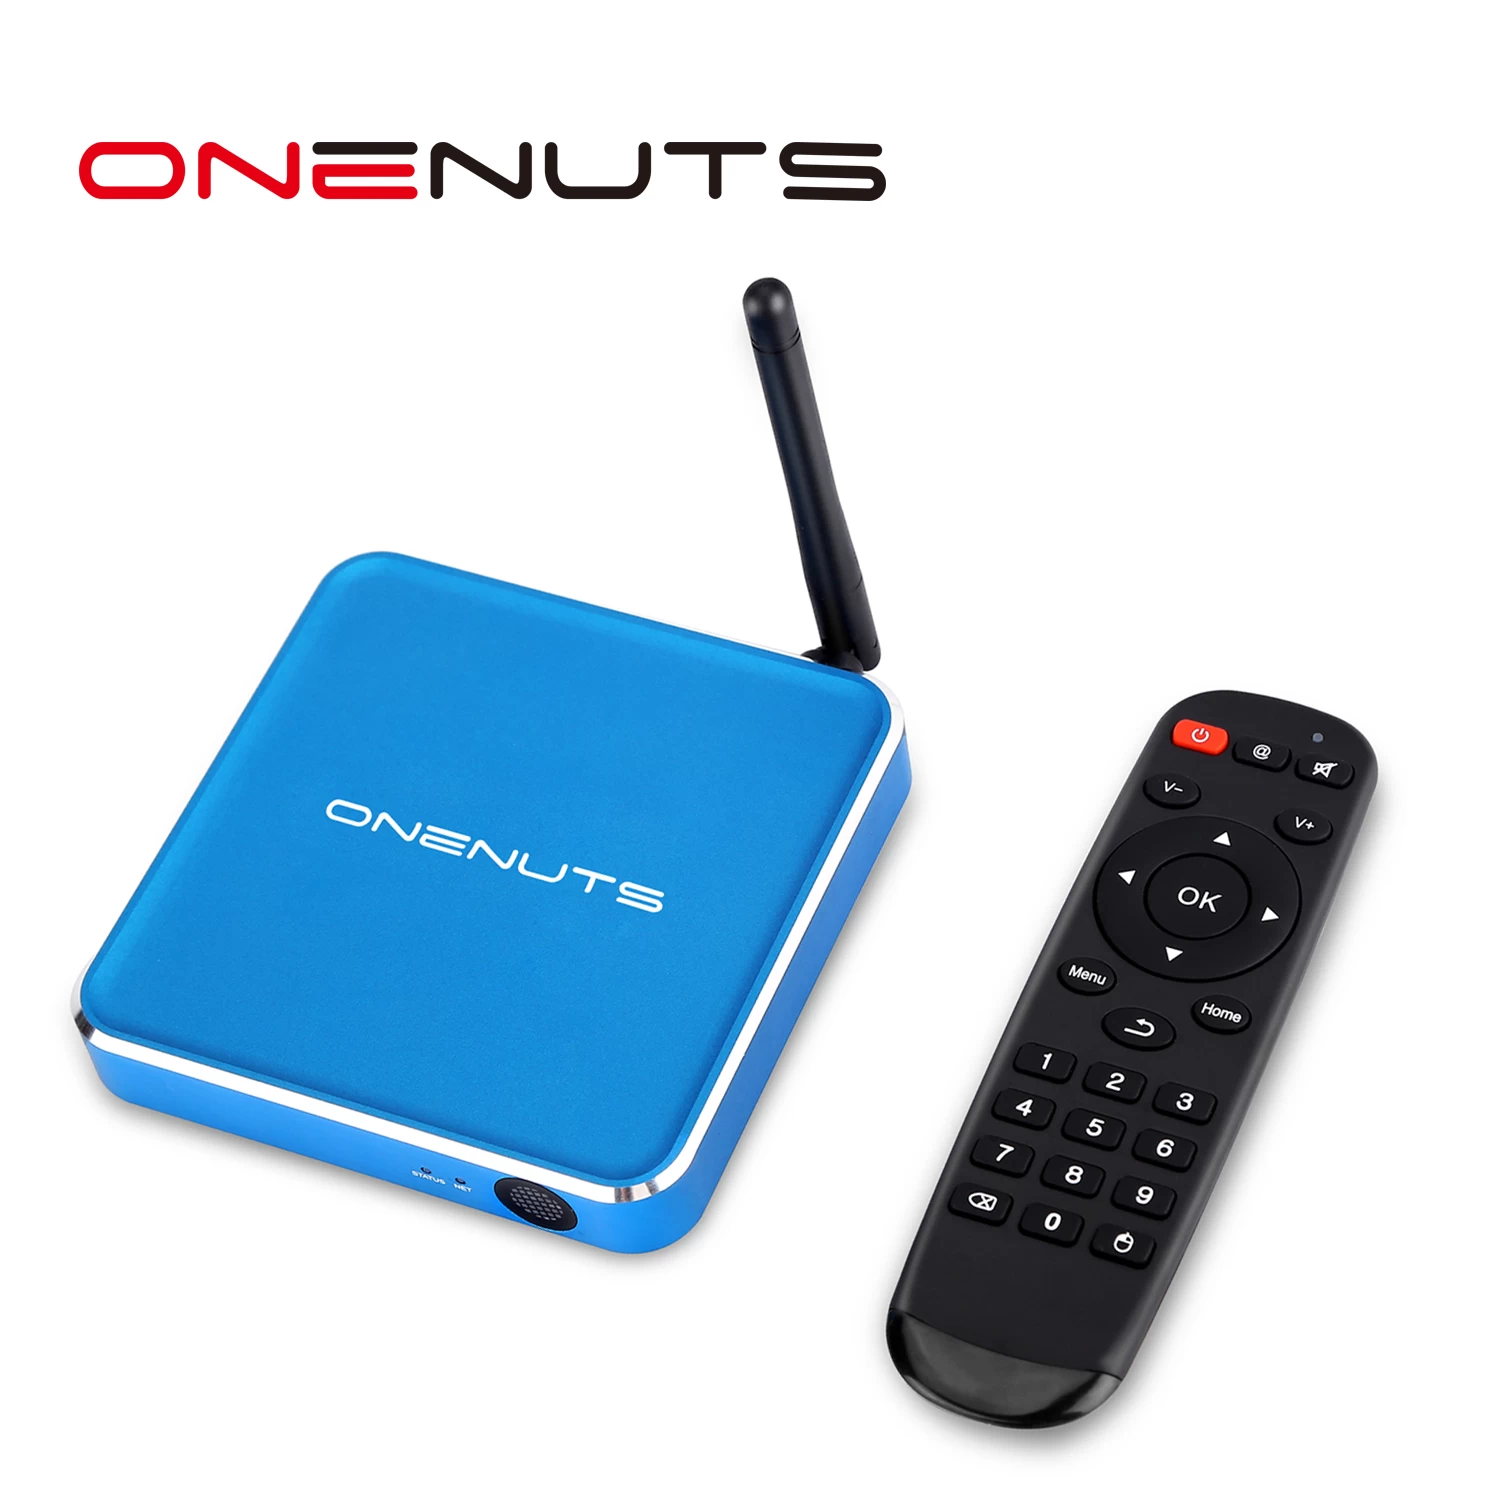 Android IPTV Box-Anbieter Android TV BOX mit integriertem 3G / 4G LTE WCDMA-Funkmodul